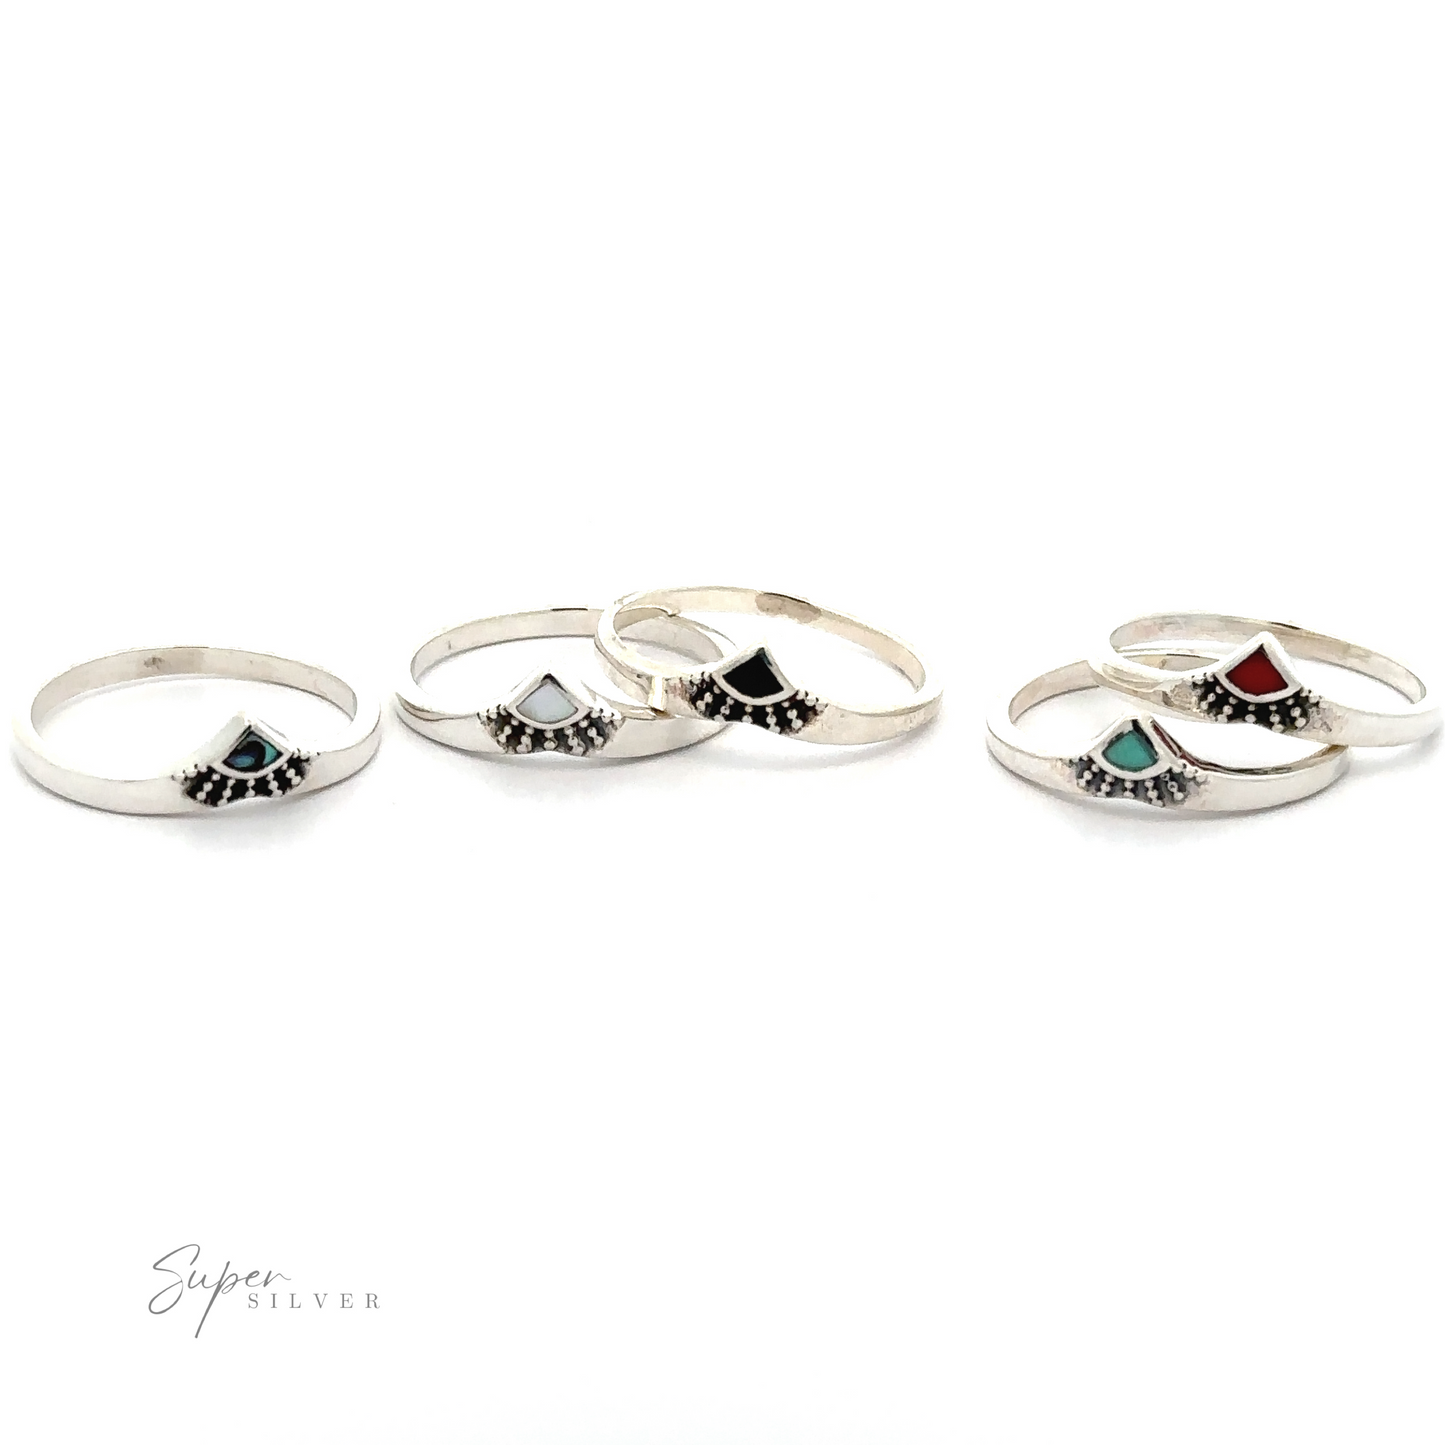 A set of four Dainty Chevron Bali Style Inlay Rings with abalone and mother of pearl stones.